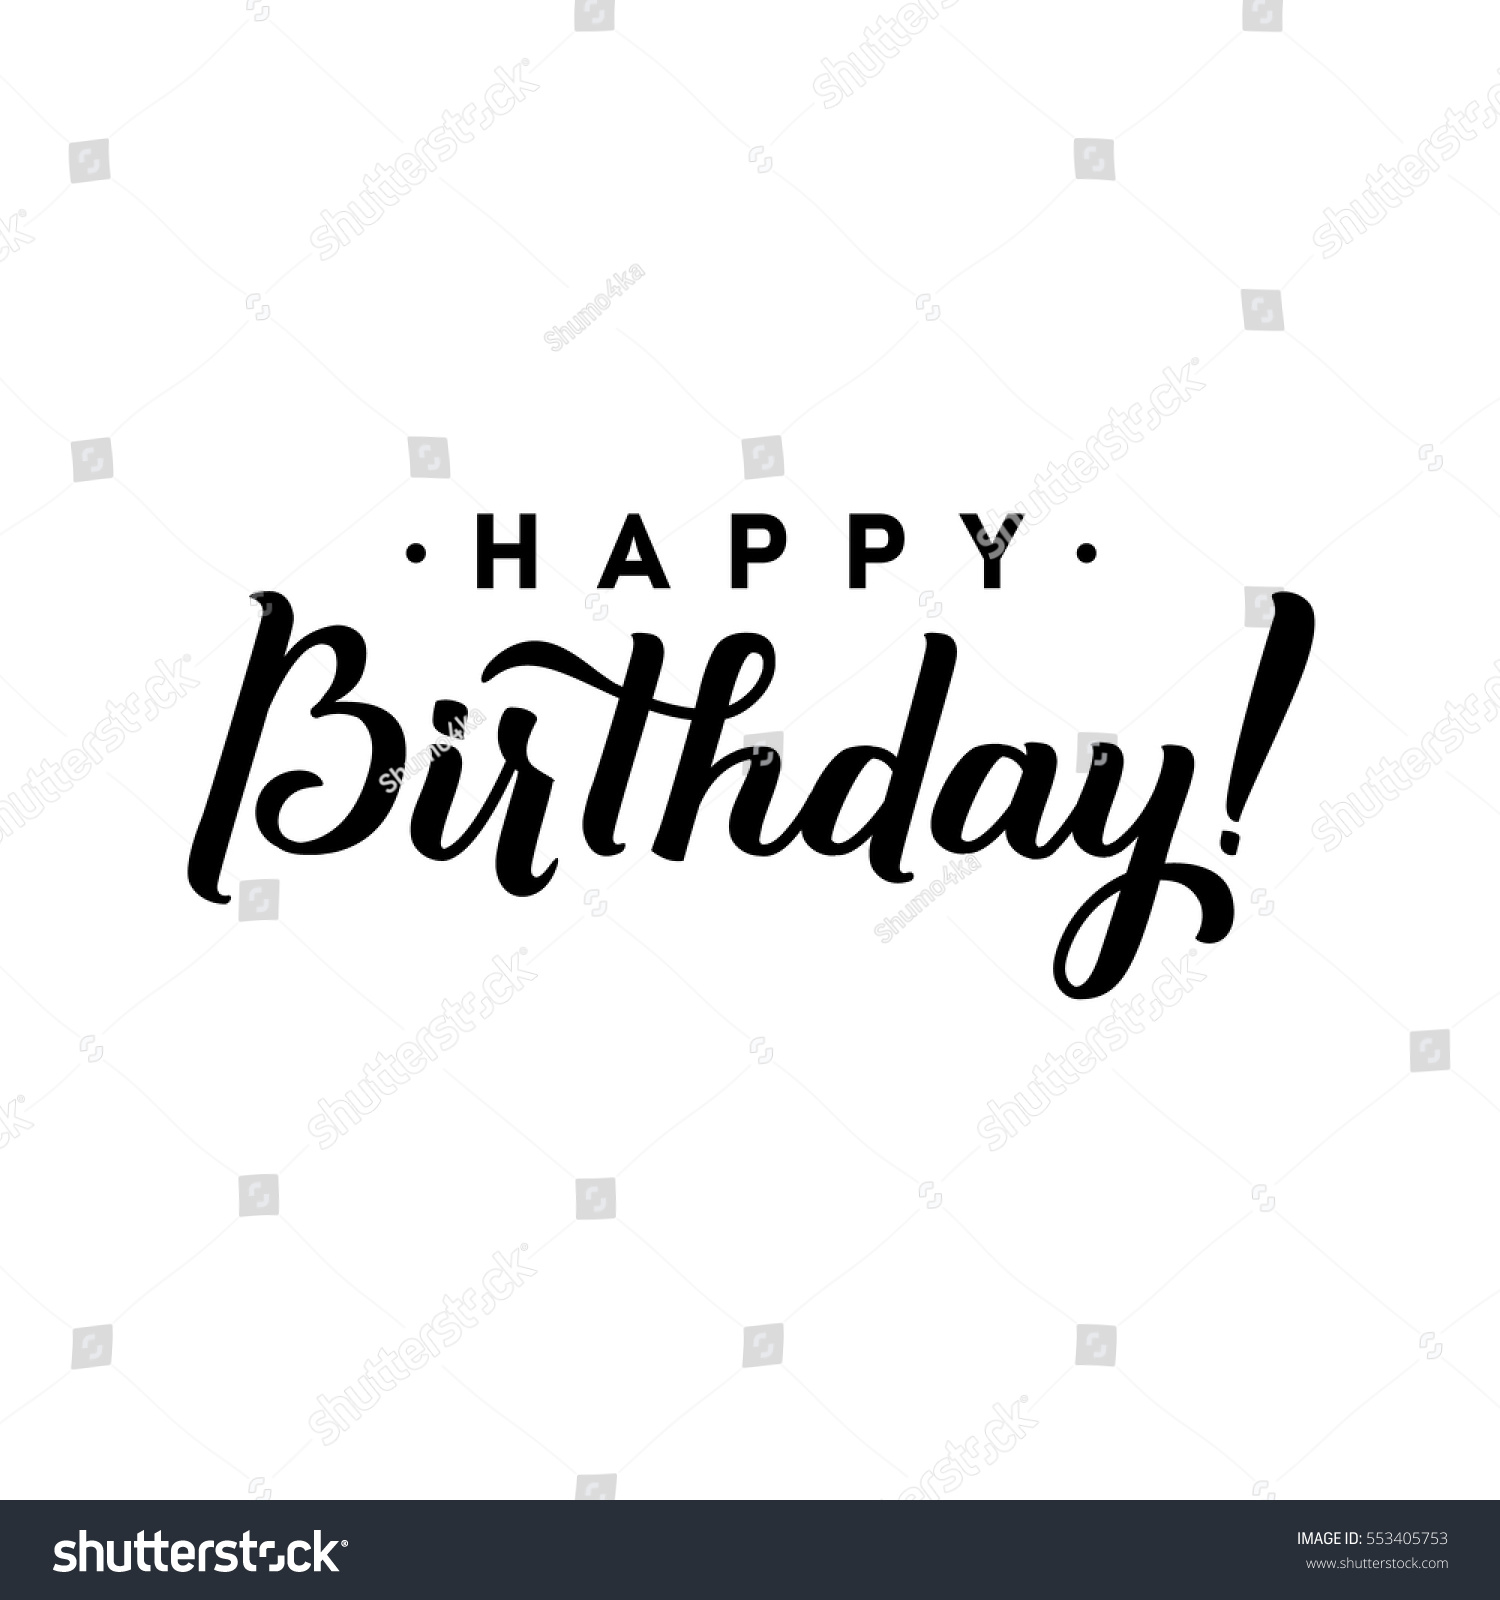 Happy Birthday You Calligraphy Greeting Card Stock Vector (Royalty Free ...